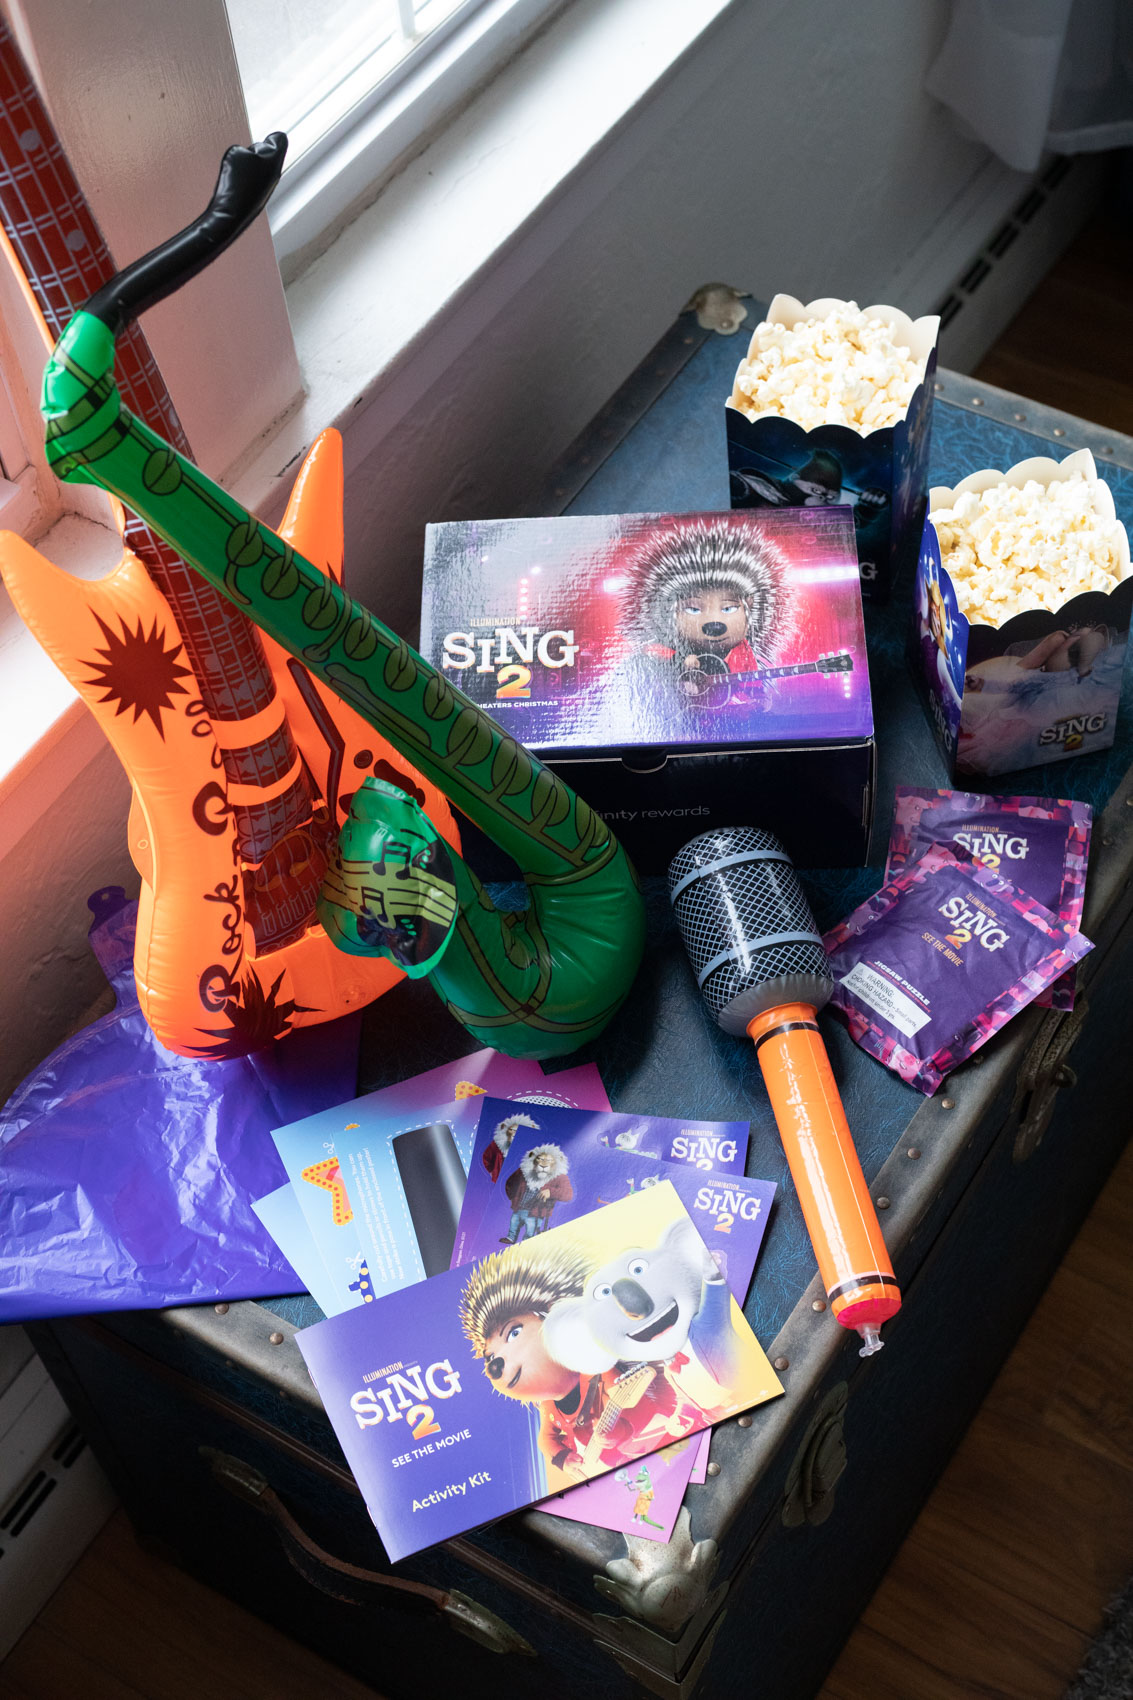 Activity sheets, blow up instruments, popcorn, and puzzles from inside the Sing 2 Movie Night Kit from Xfinity